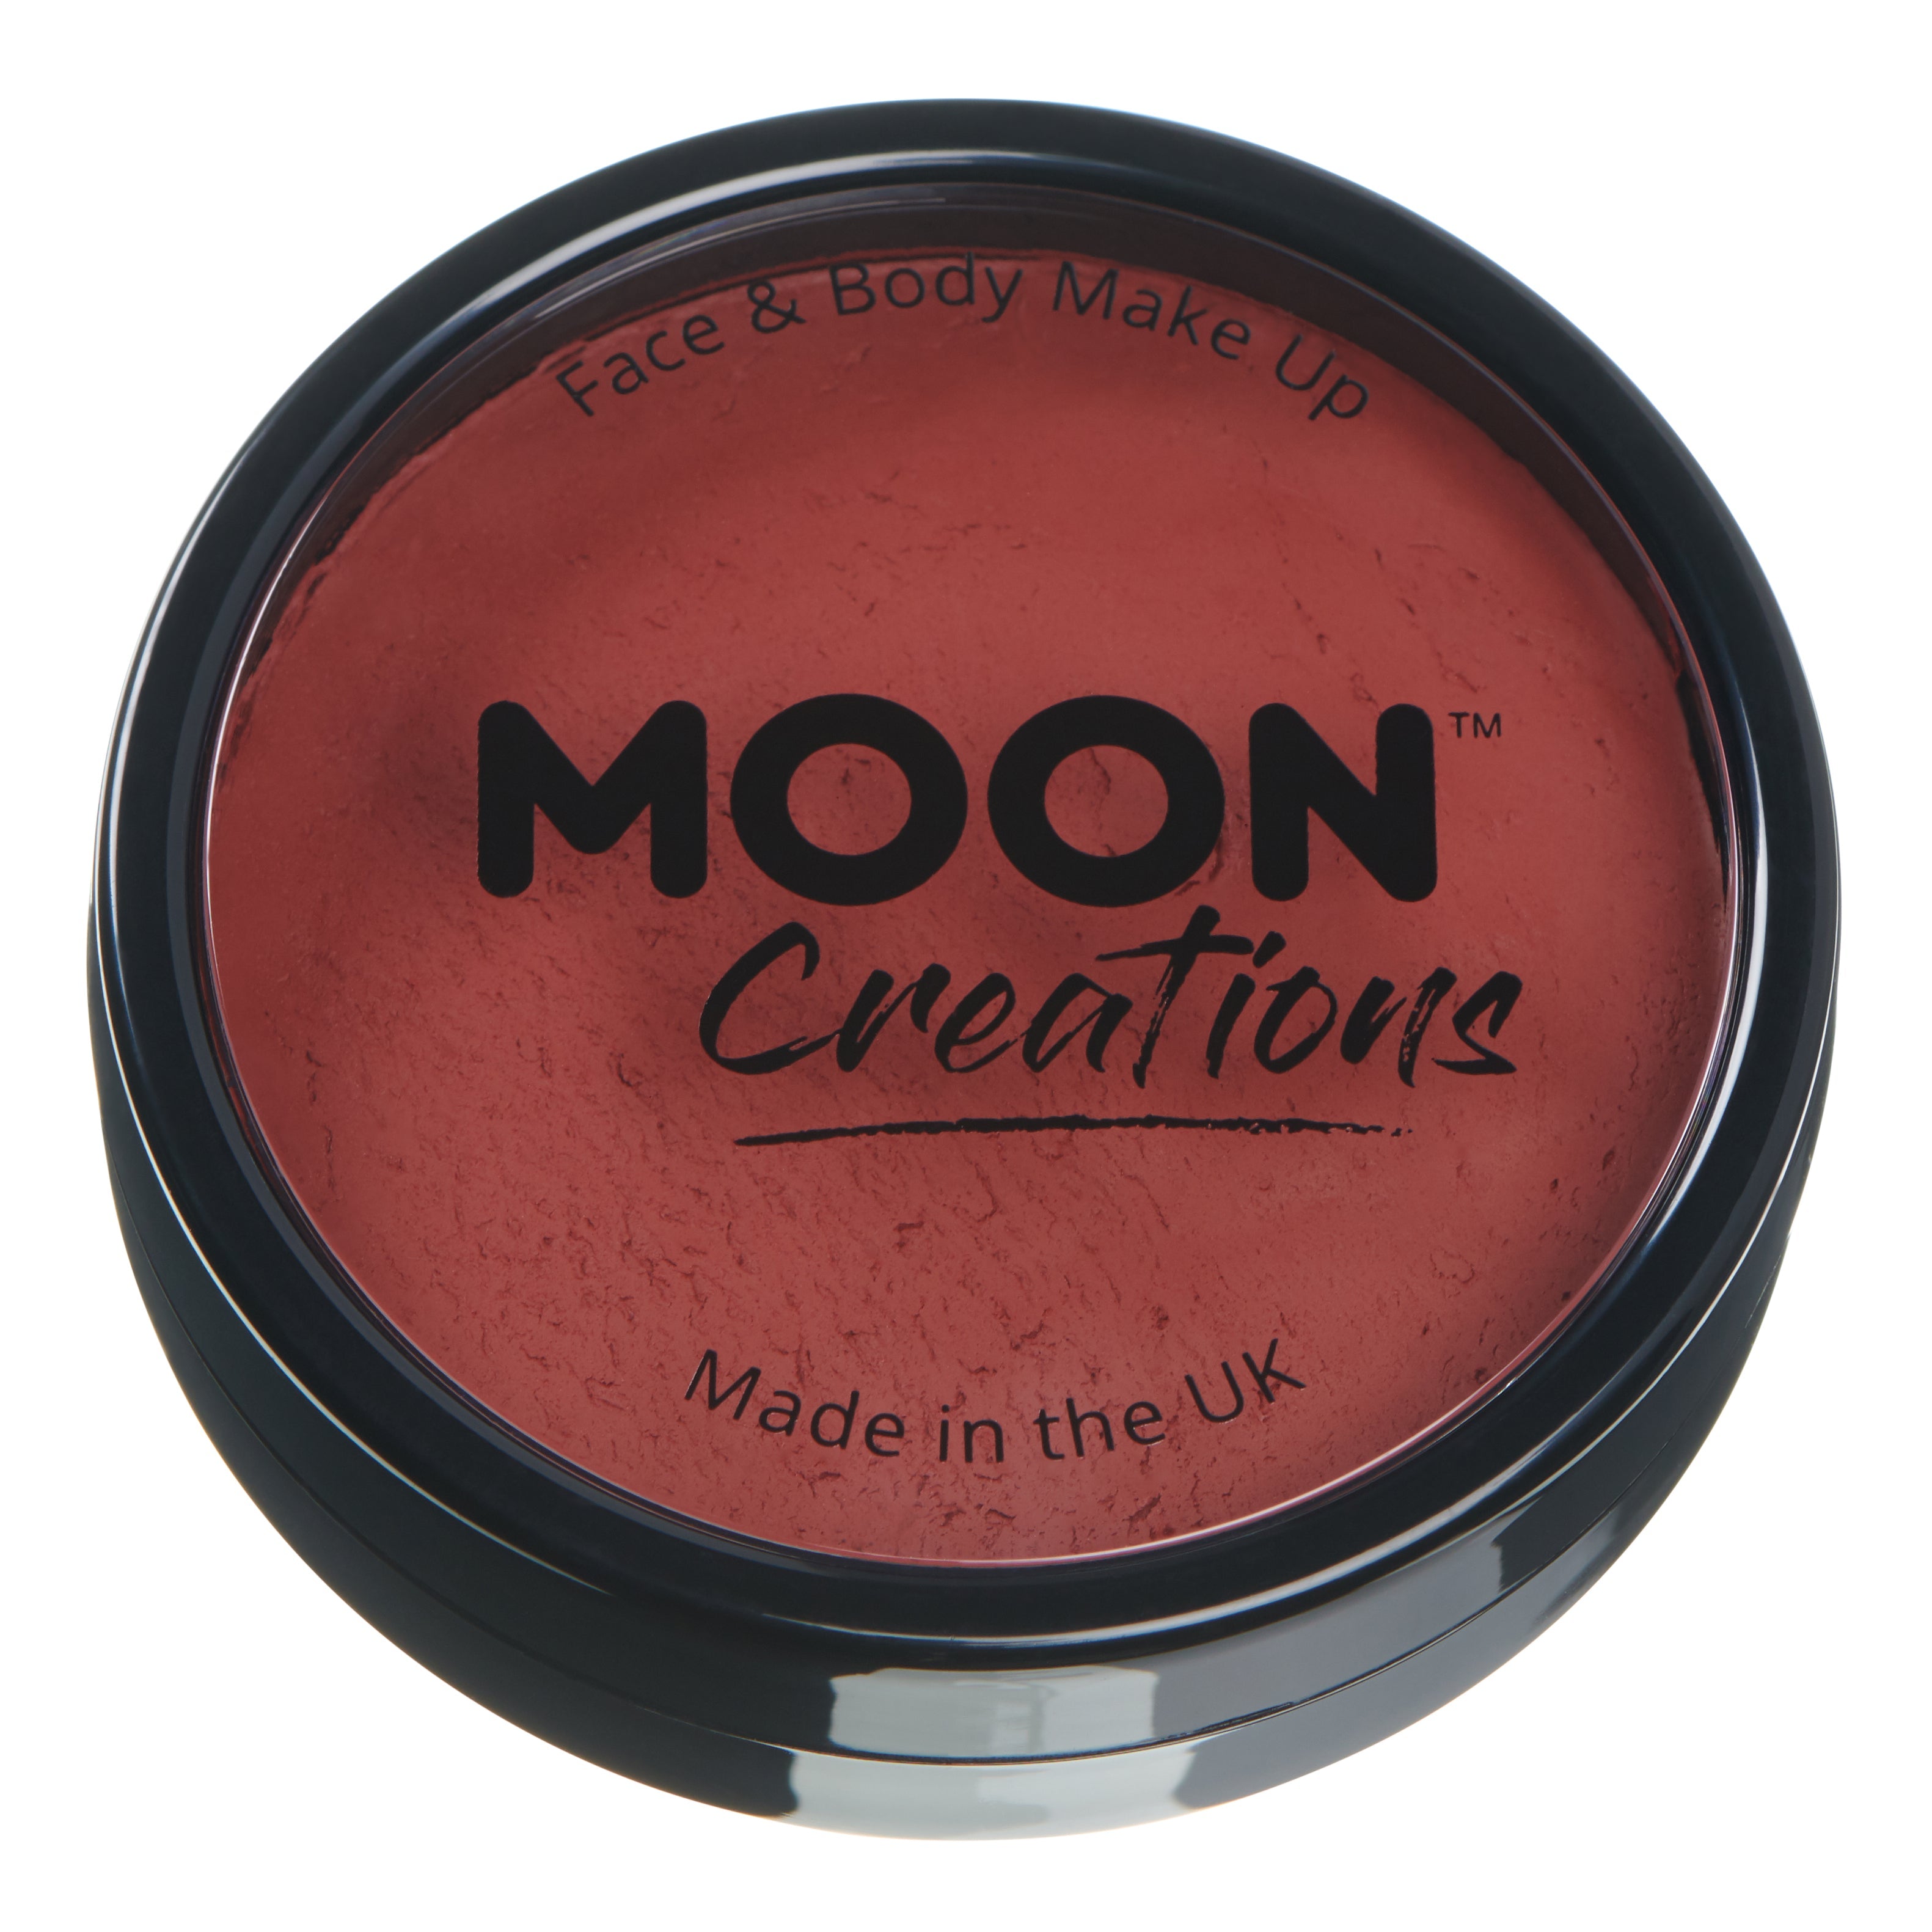 Dark Red - Professional Face Paint, 36g. Cosmetically certified, FDA & Health Canada compliant, cruelty free and vegan.